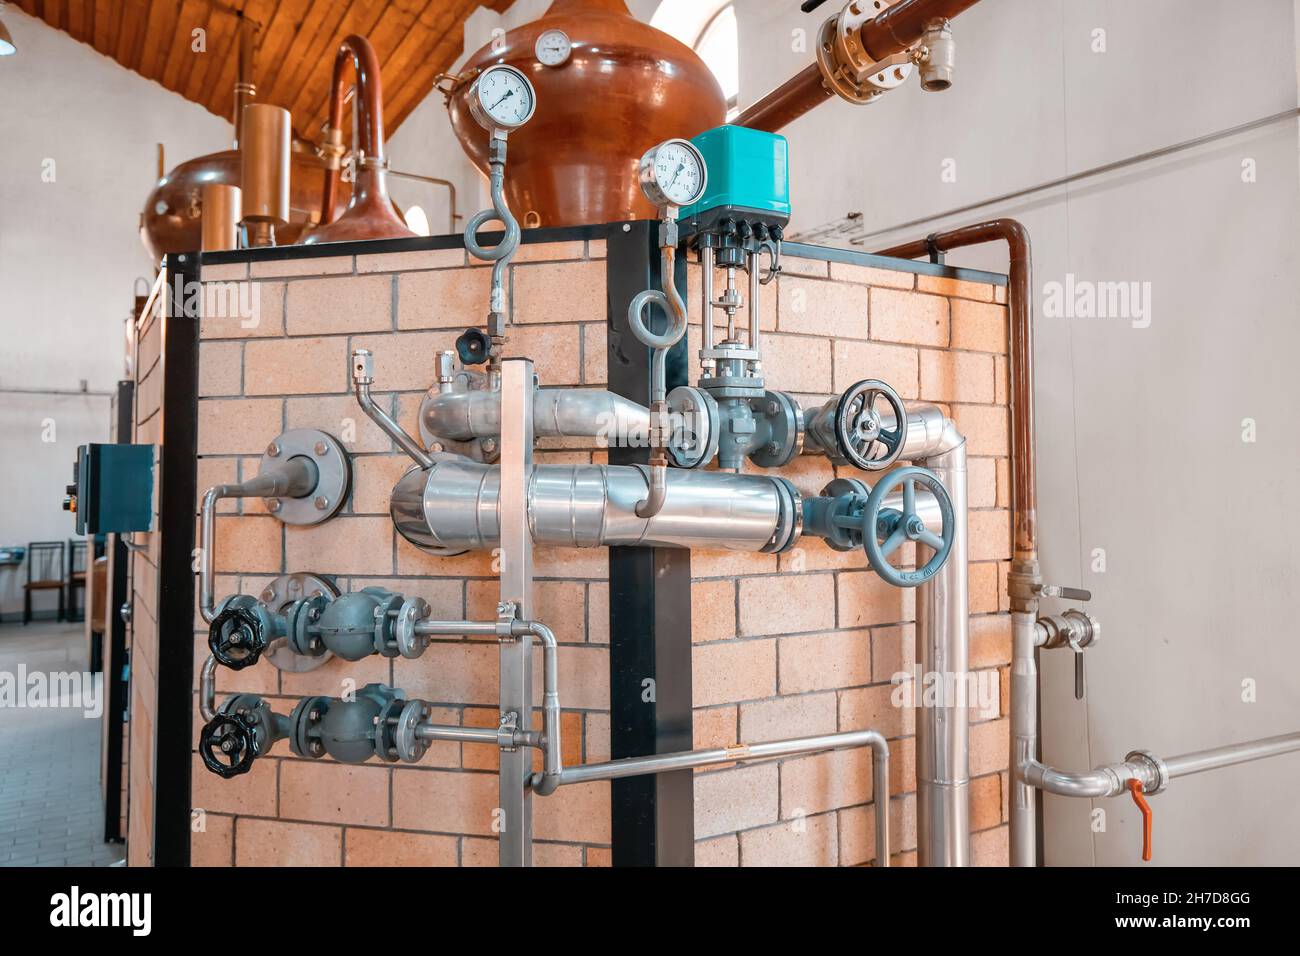 At the distillery plant of strong alcohol. Close-up of pipes with valves and a pressure gauge Stock Photo